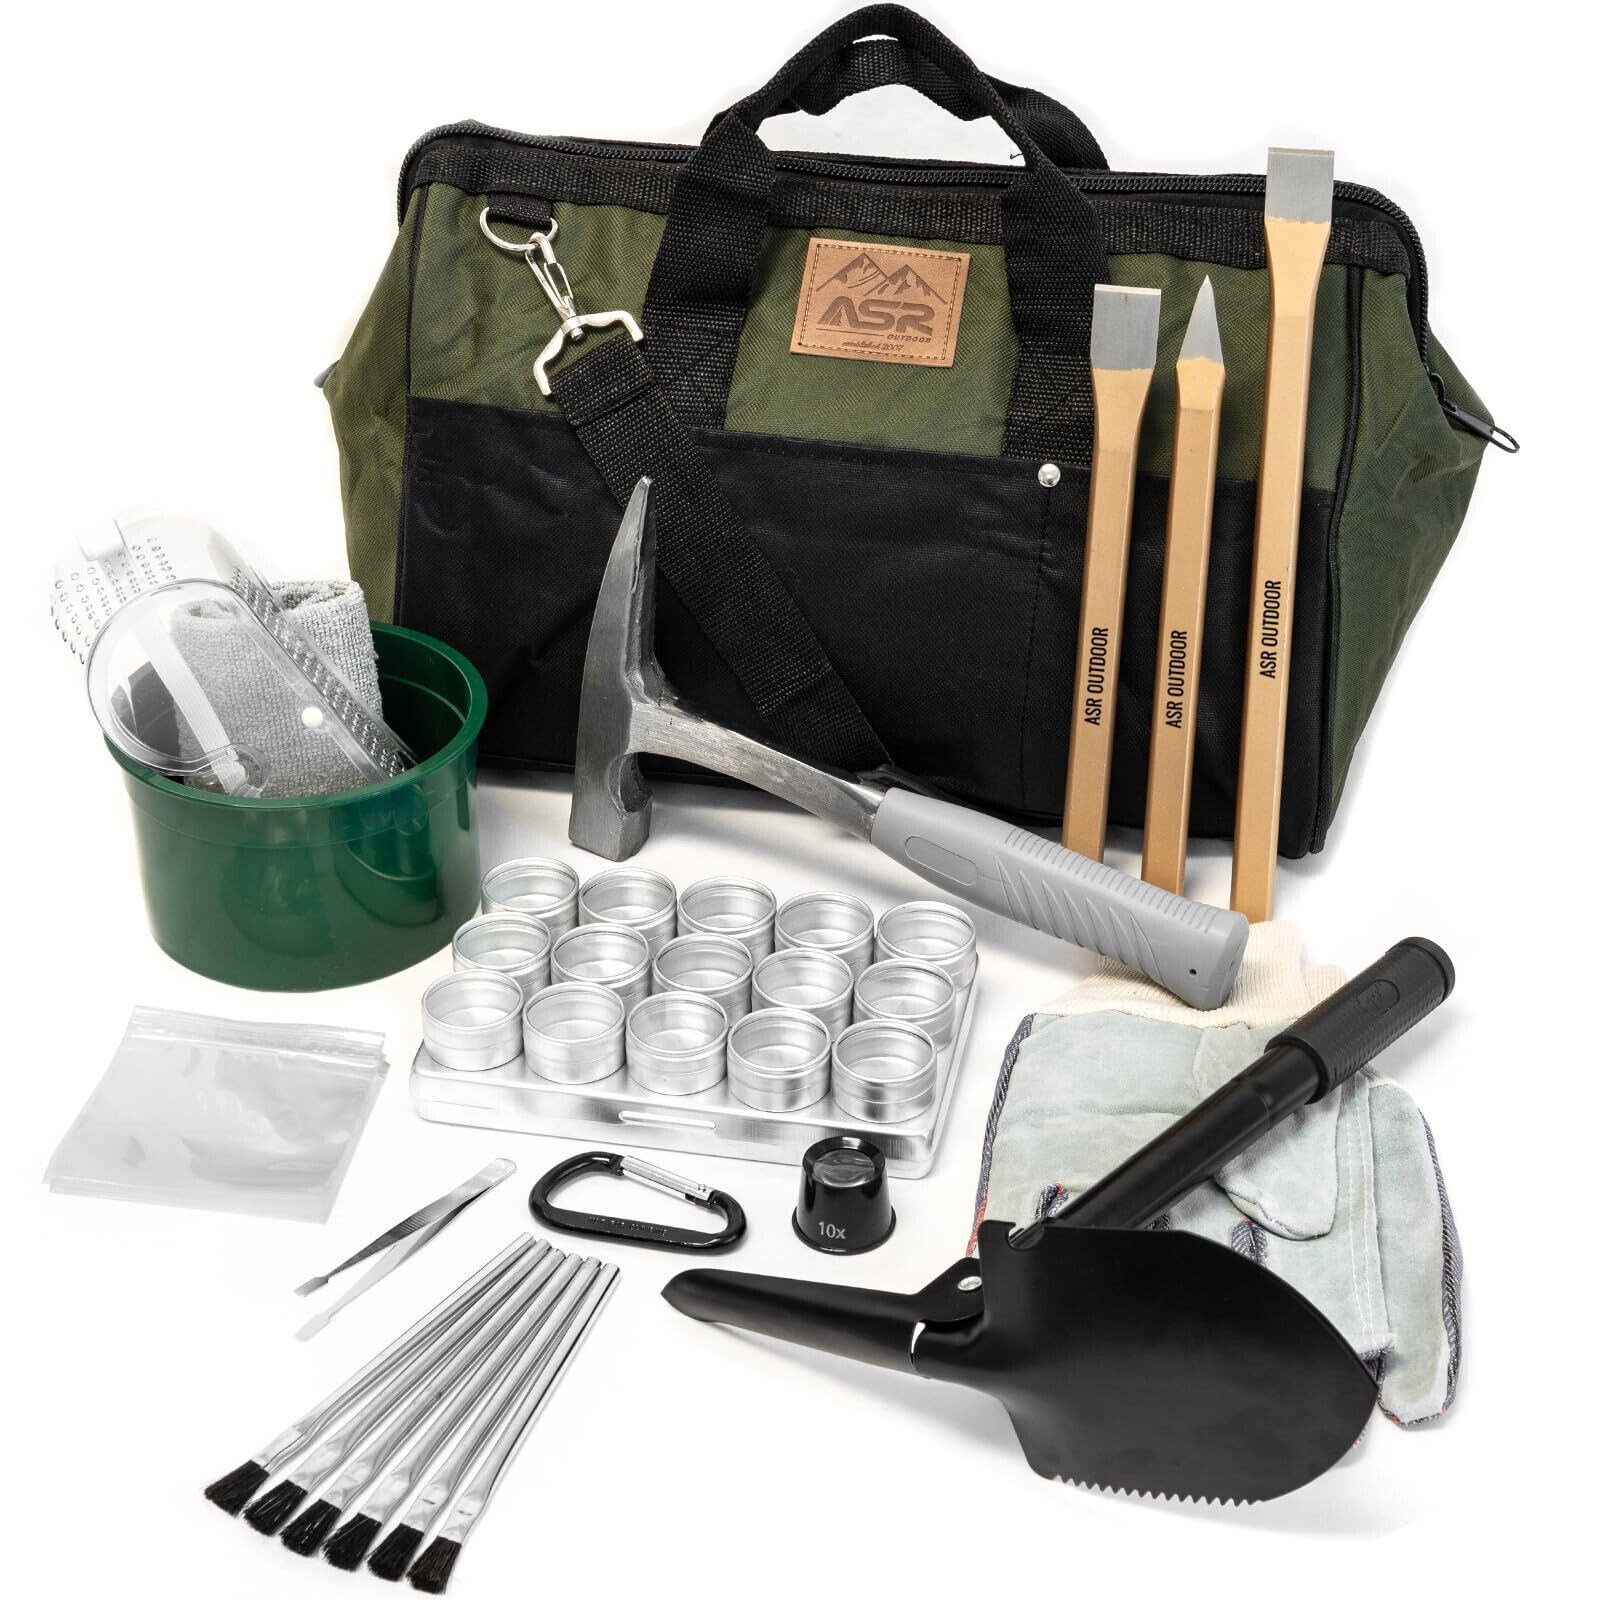 ASR Outdoor 13pc Beginner Geology Rock Hounding Kit with Mining Tools and Carry